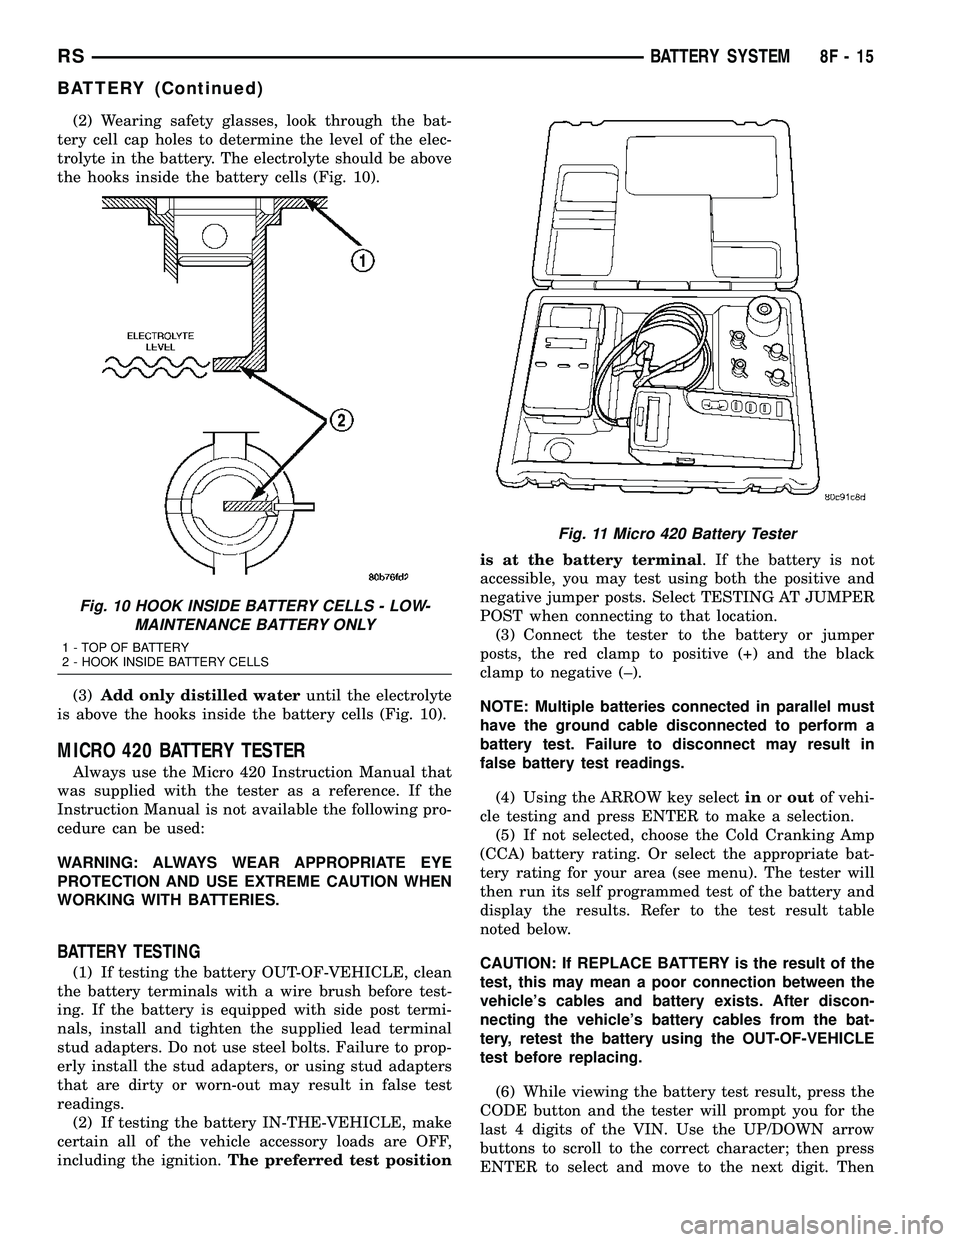 CHRYSLER VOYAGER 2005  Service Manual (2) Wearing safety glasses, look through the bat-
tery cell cap holes to determine the level of the elec-
trolyte in the battery. The electrolyte should be above
the hooks inside the battery cells (Fi